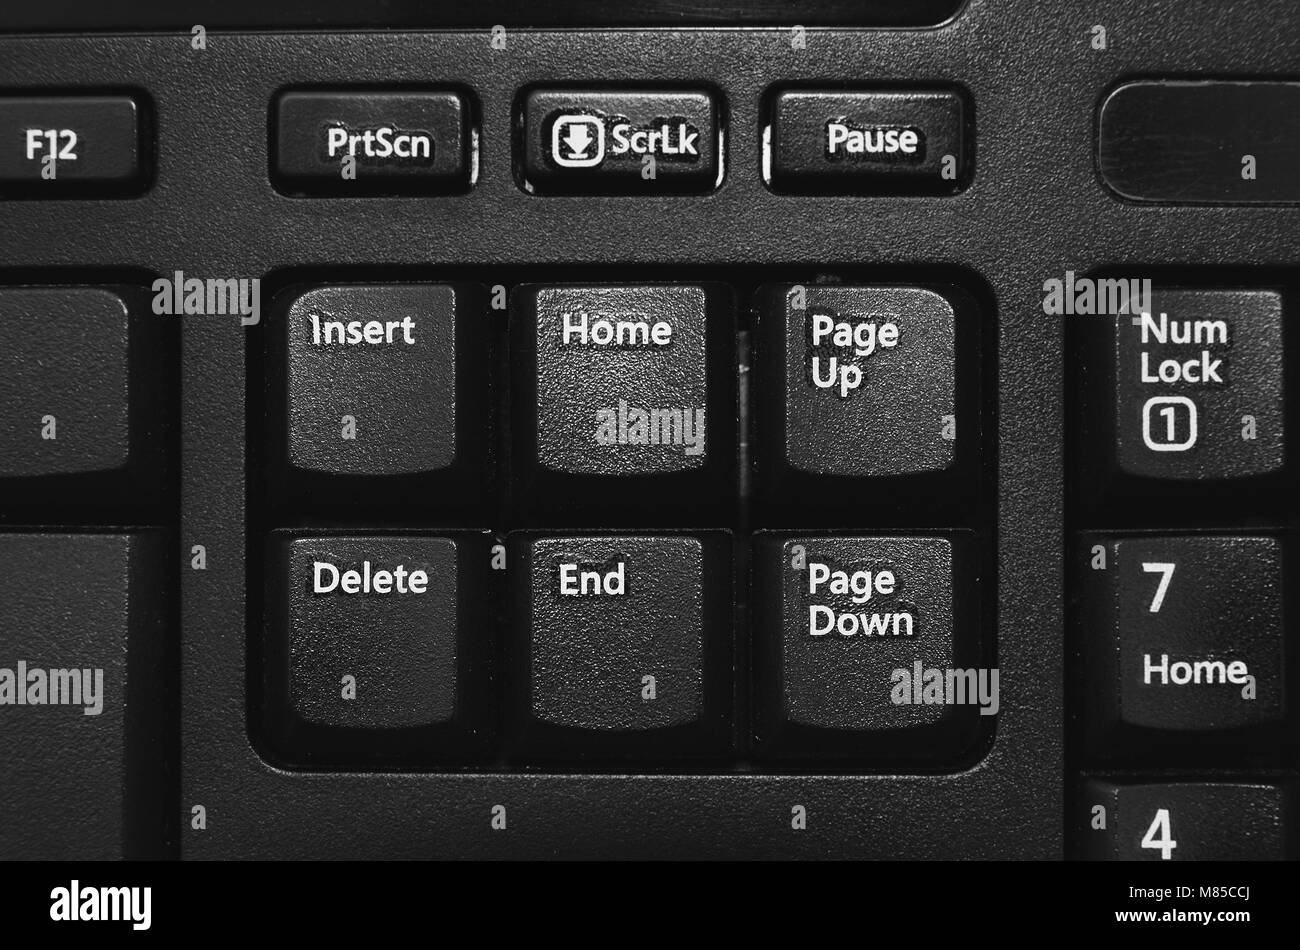 Close up on the Insert, Home, Page up, Delete, End, Page down buttons from a black pc keyboard. Stock Photo